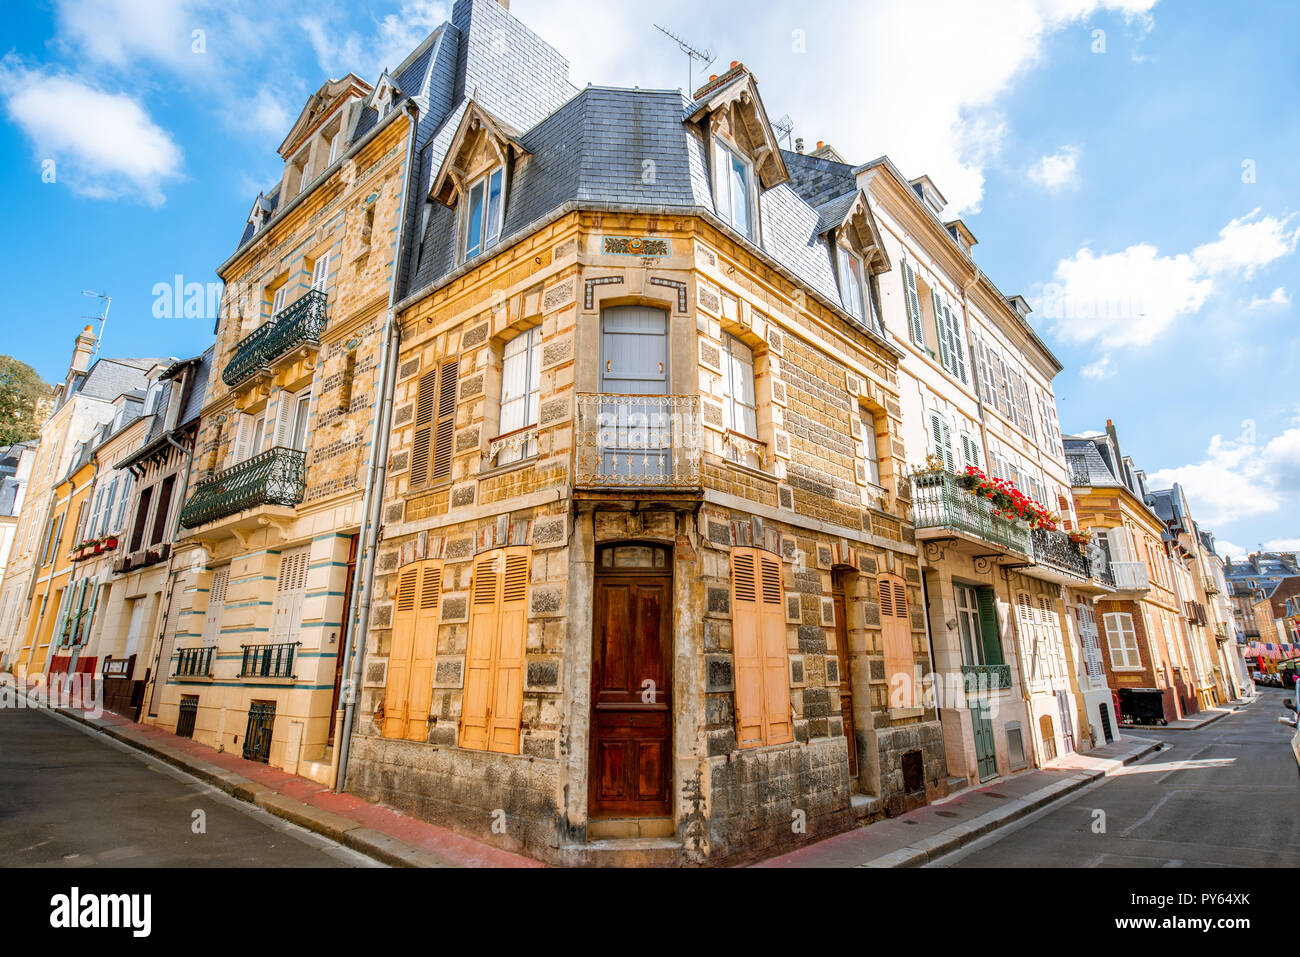 Street view with luxury buildings in the center of the old town of Trouville, famous french town in Normandy Stock Photo